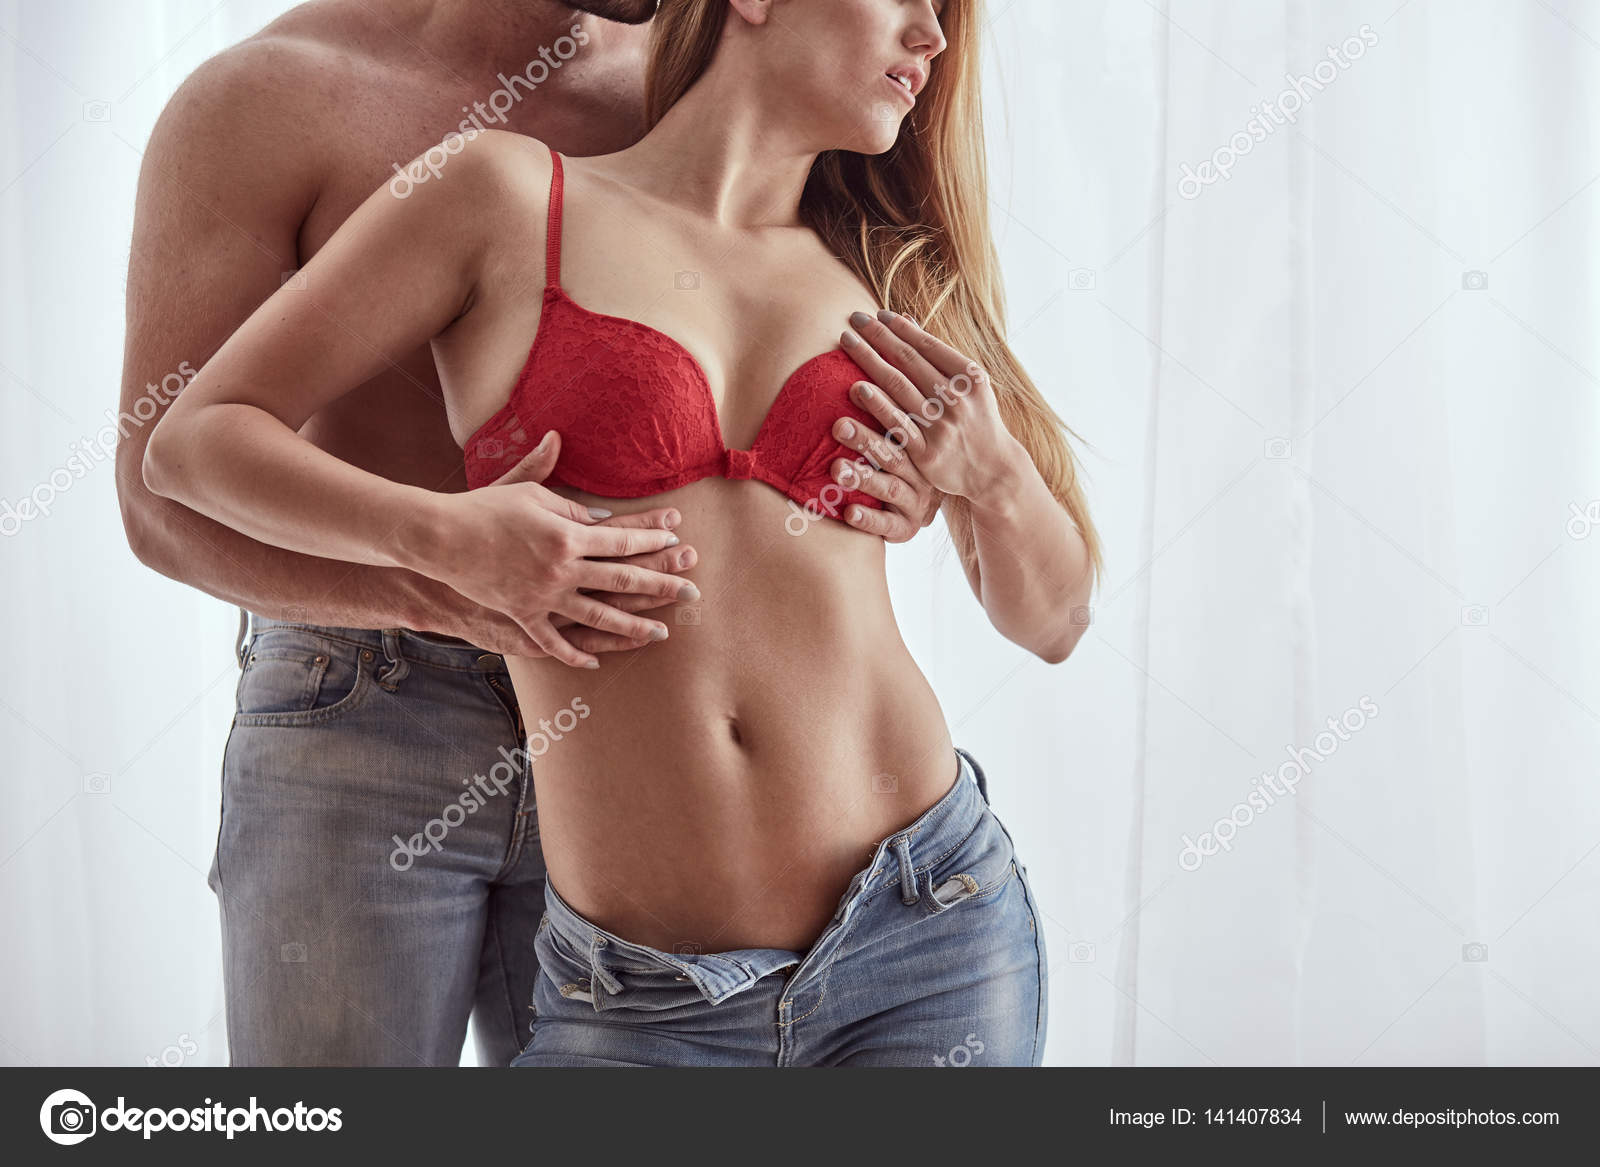 How to touch gf boobs